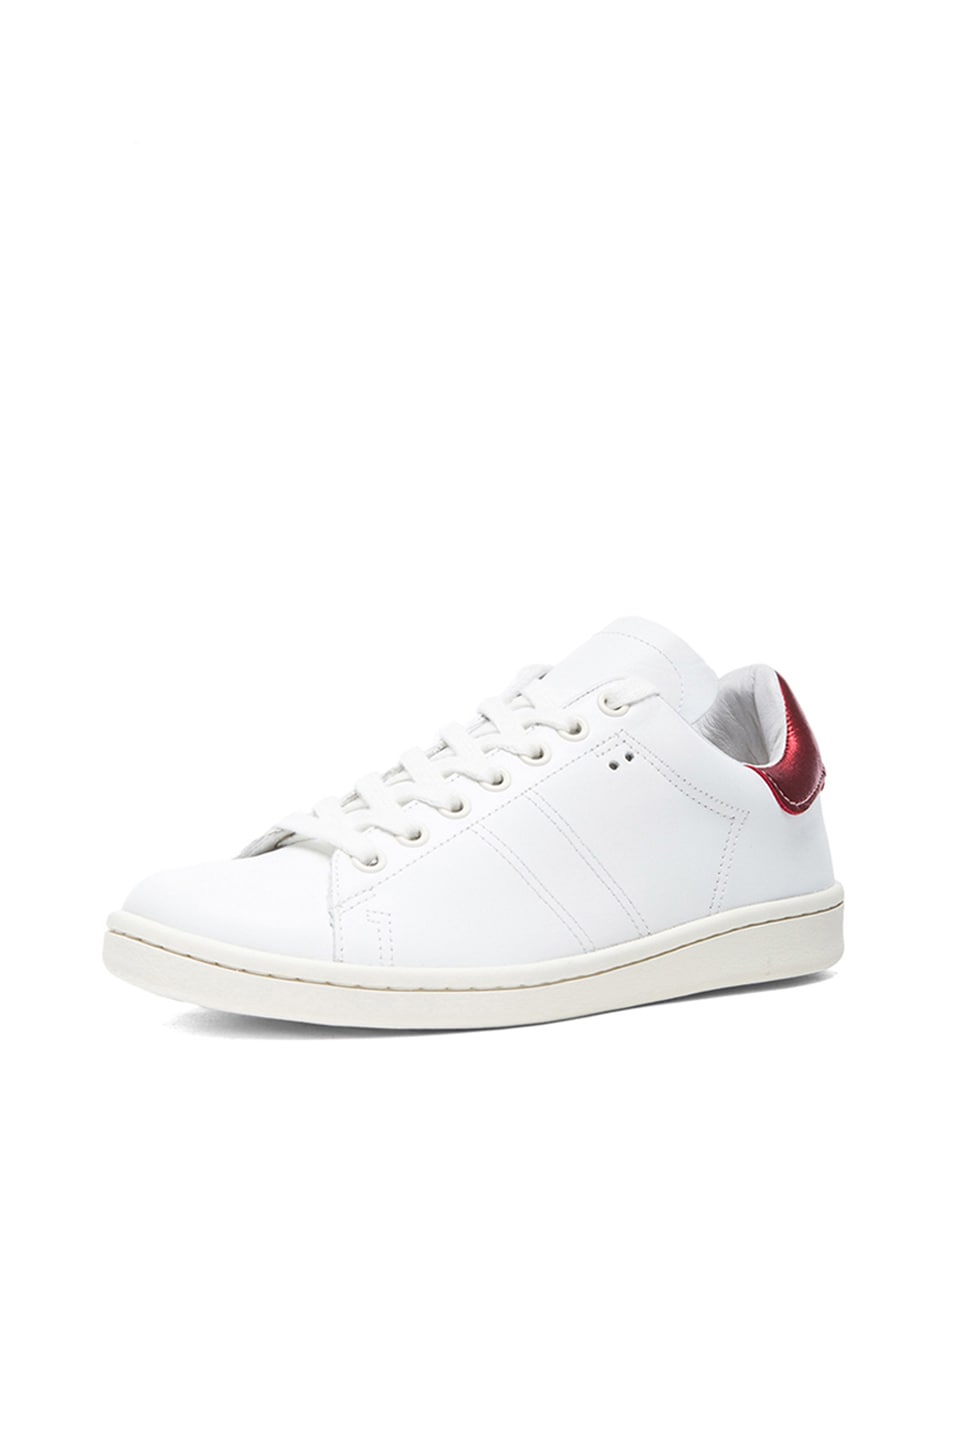 Isabel Marant Bart Leather Sneakers in White | FWRD